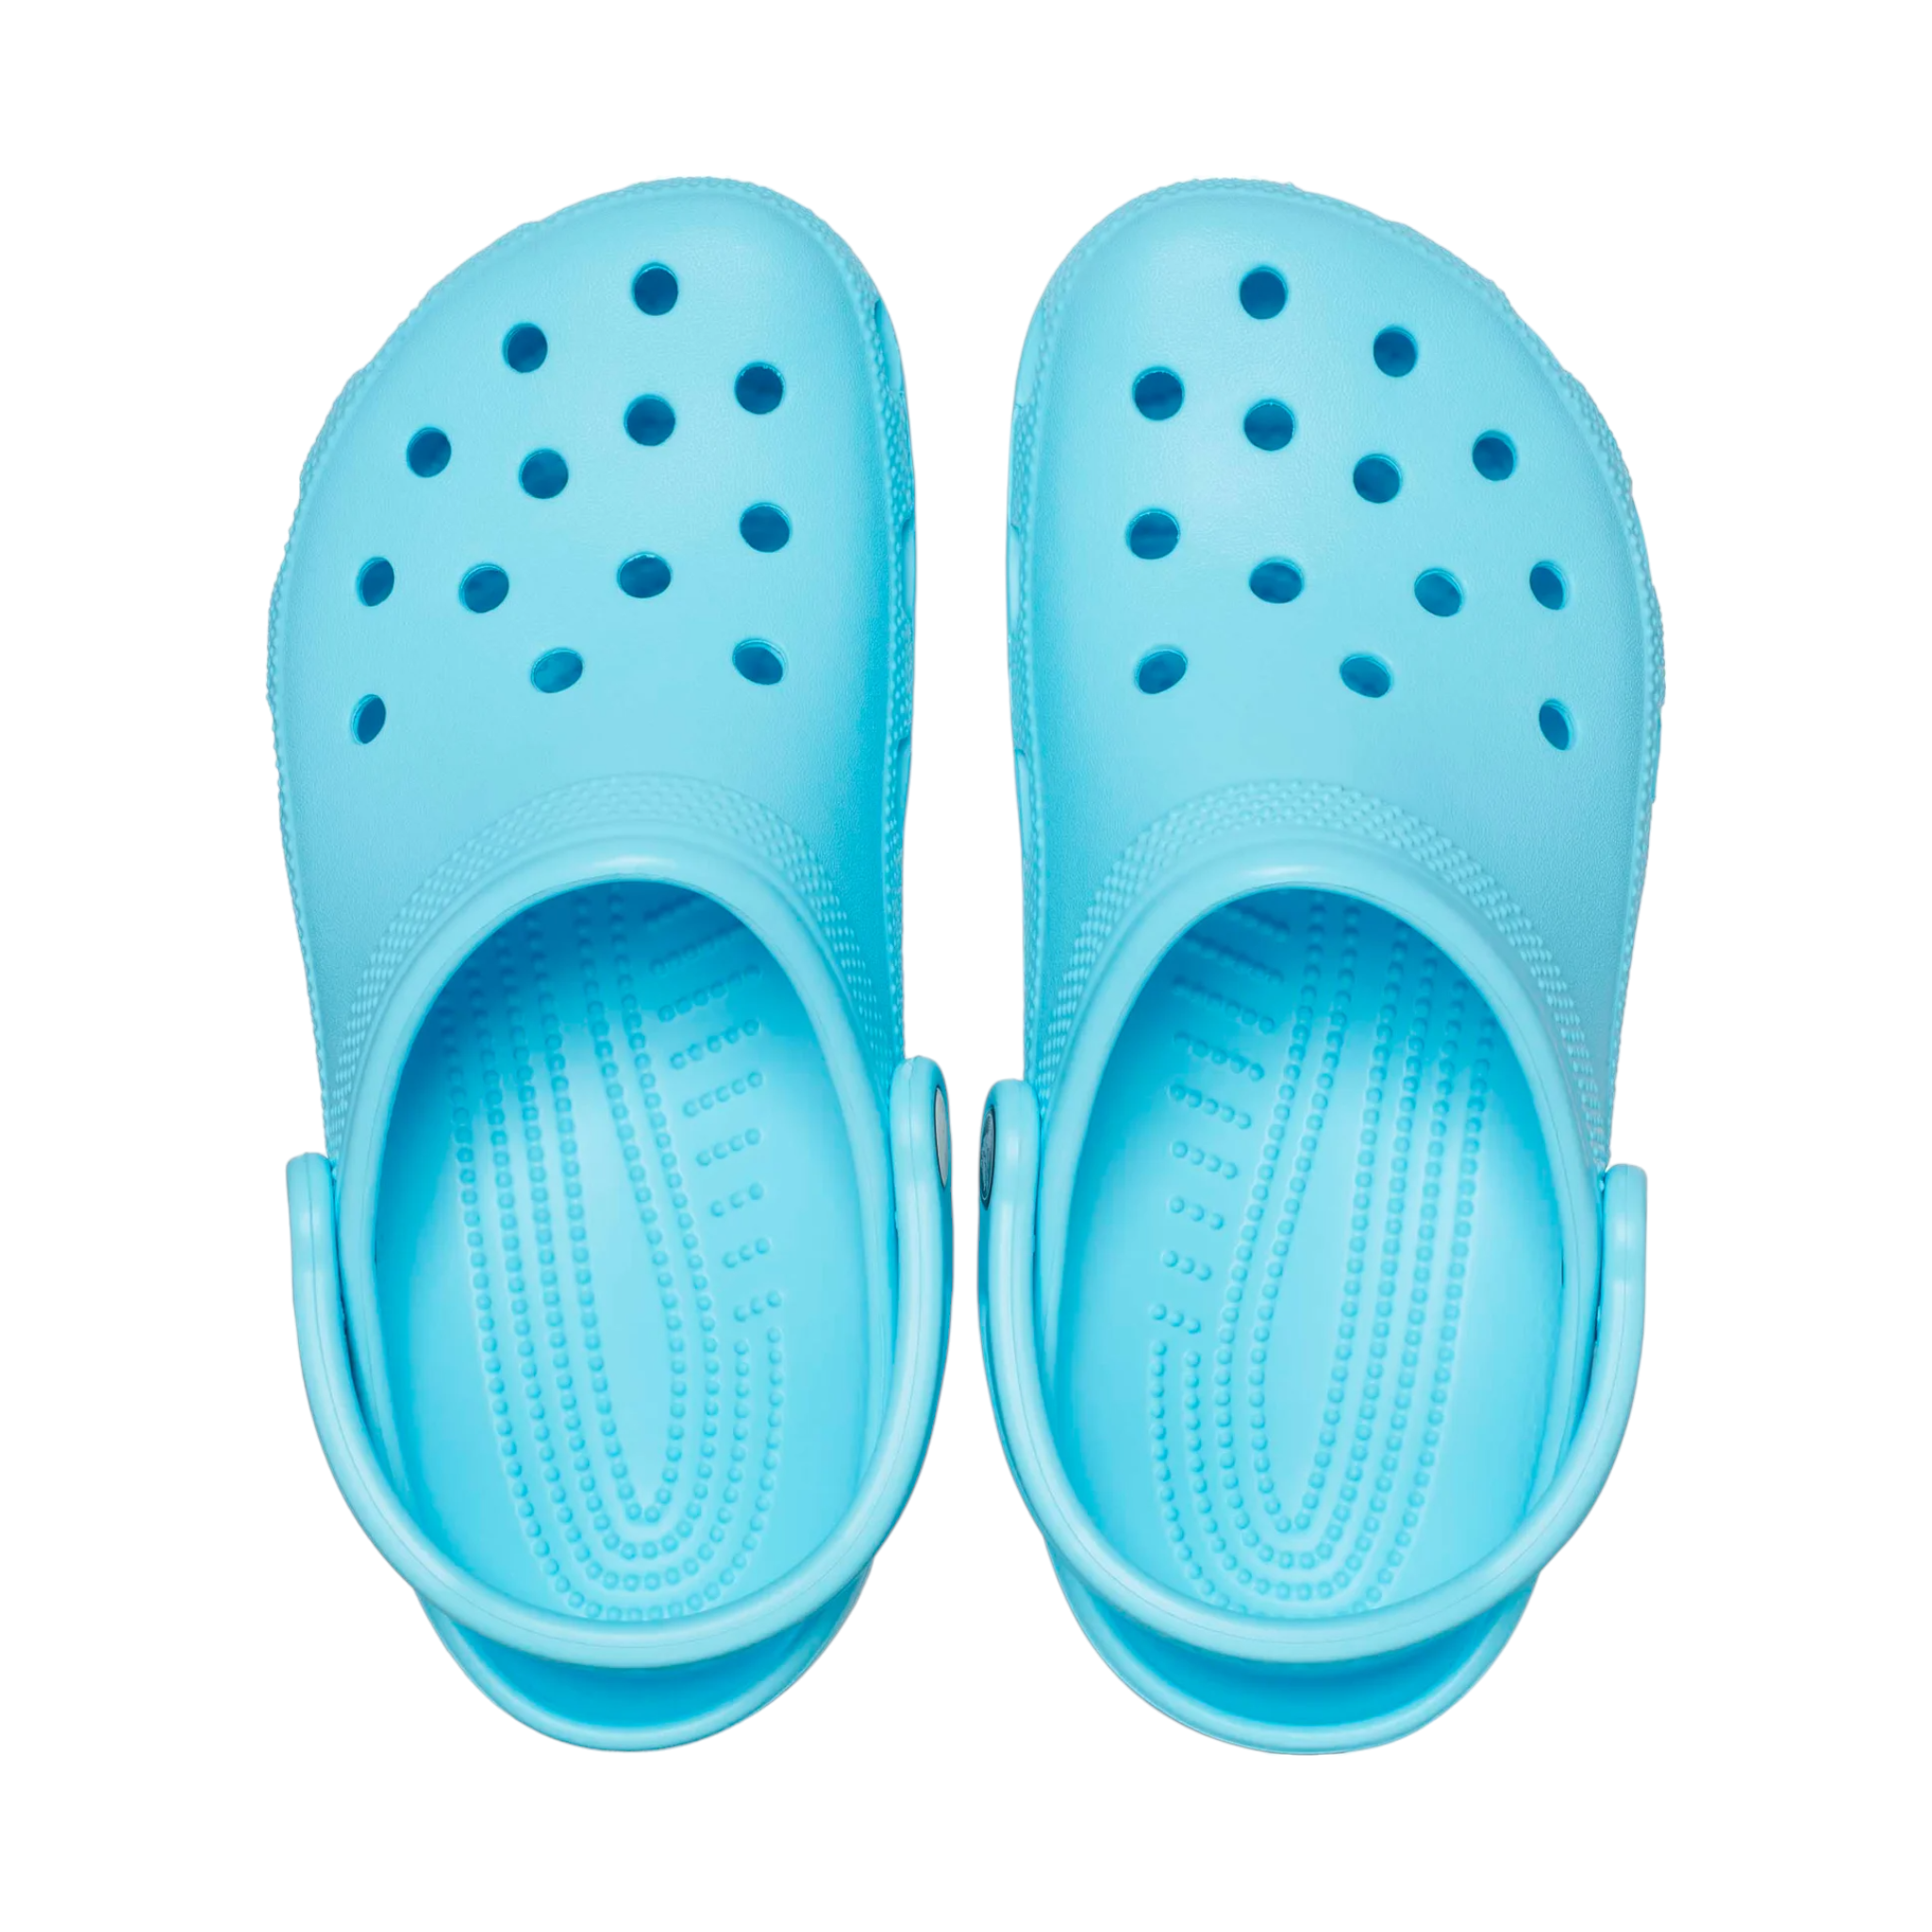 Crocs Classic Clogs online and instore with shoe&amp;me Mount Maunganui. Shop arctic Clogs